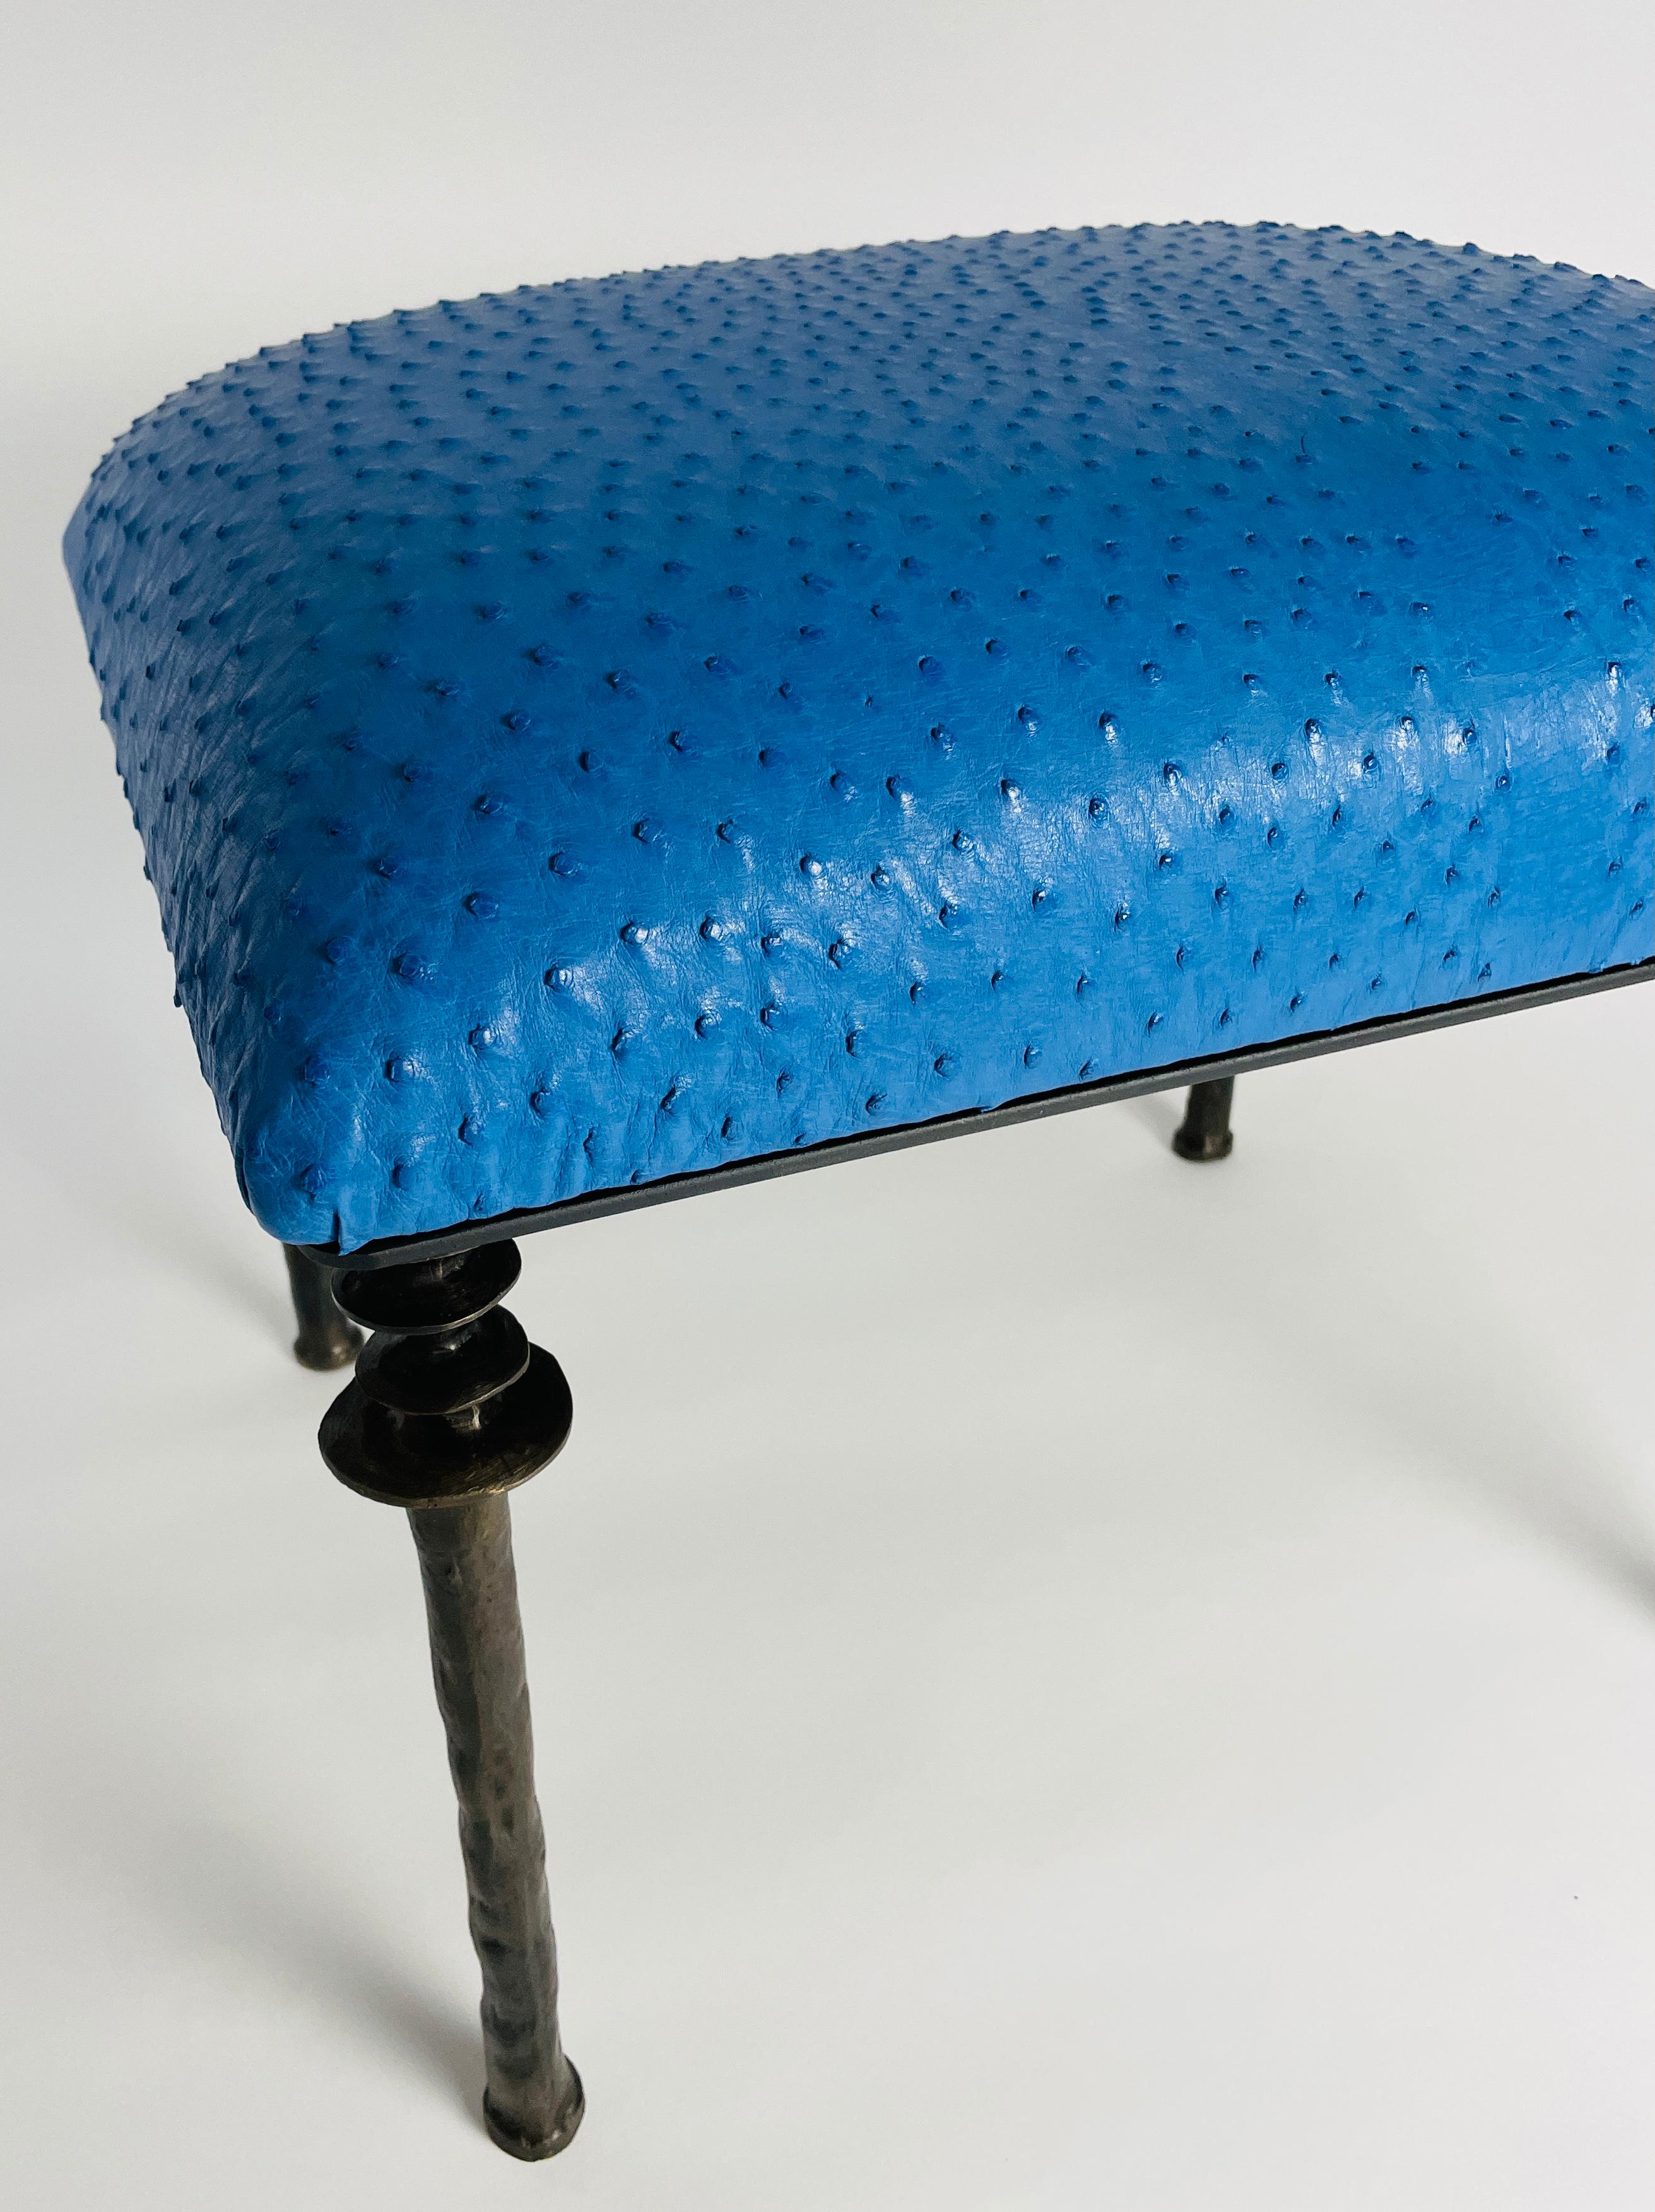 Pair of Sorgue Stools, by Bourgeois Boheme Atelier, Blue Ostrich Leather For Sale 3